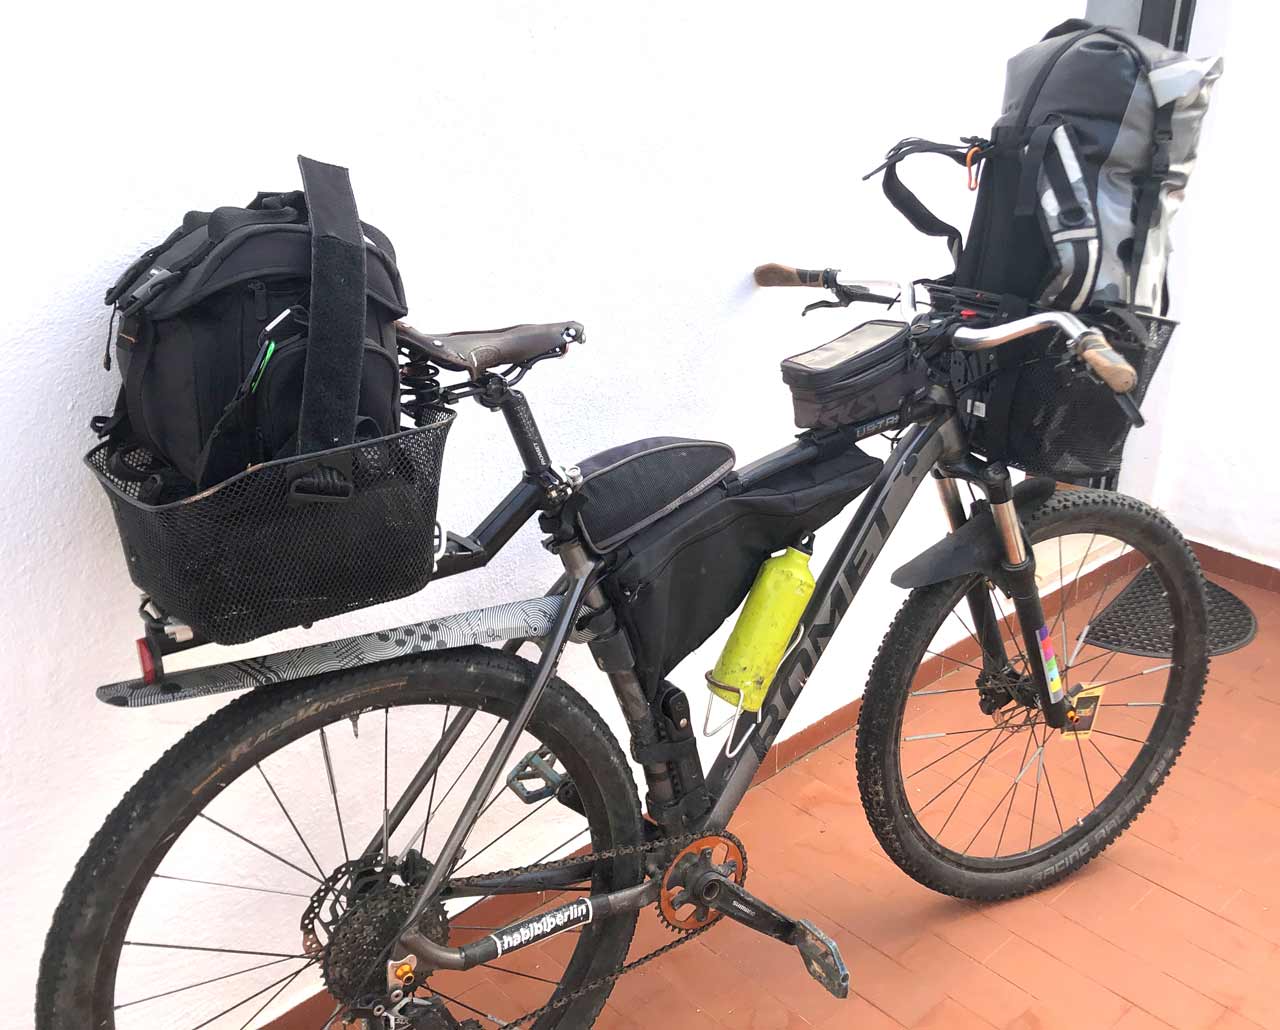 Bikepacking with baskets